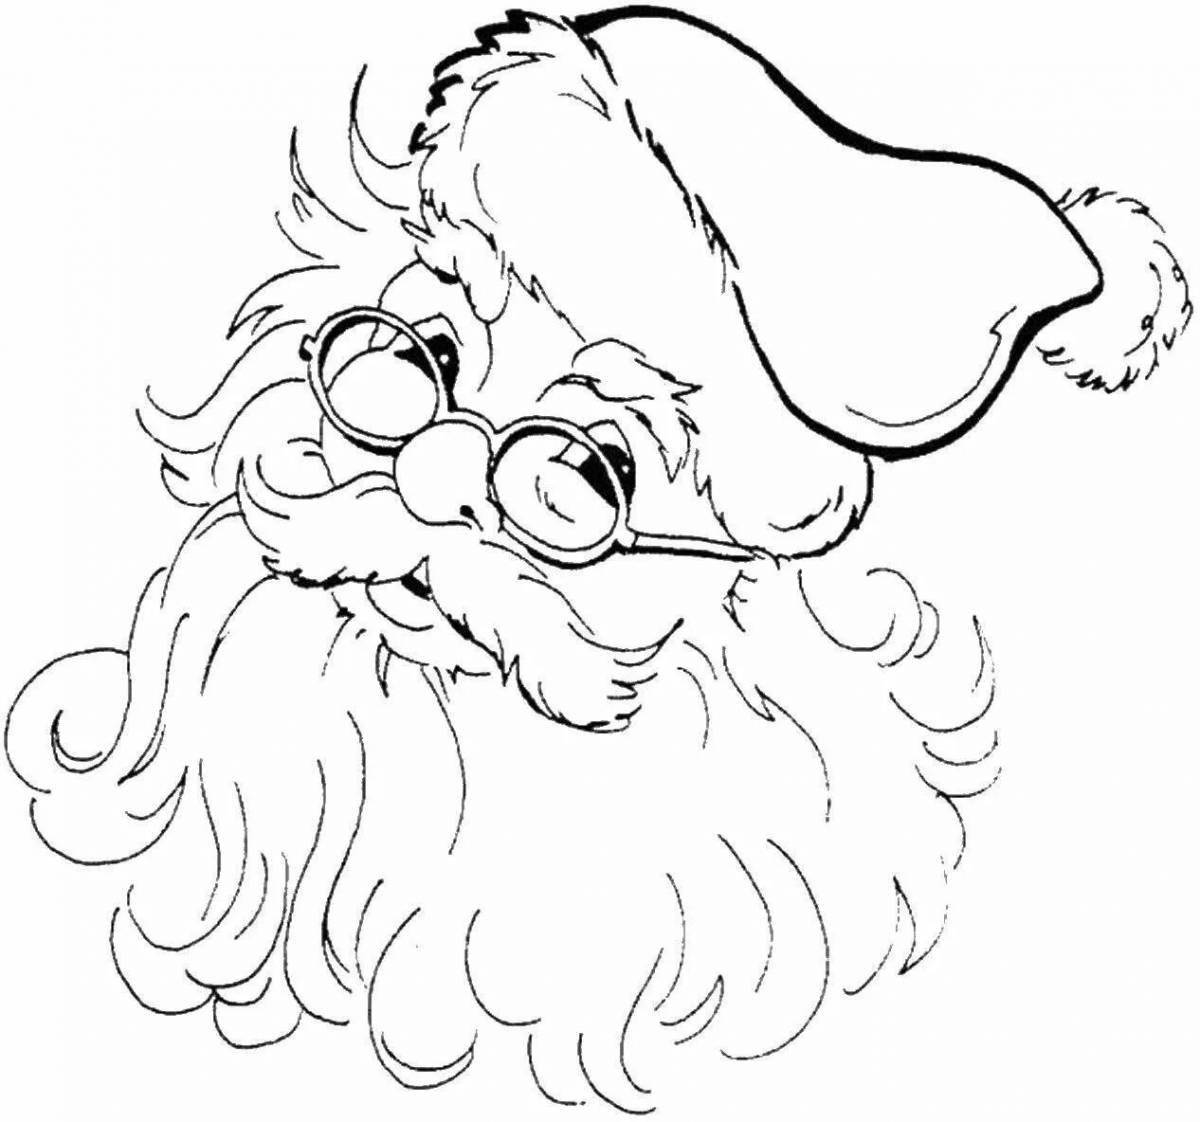 Blessed Santa Claus coloring page